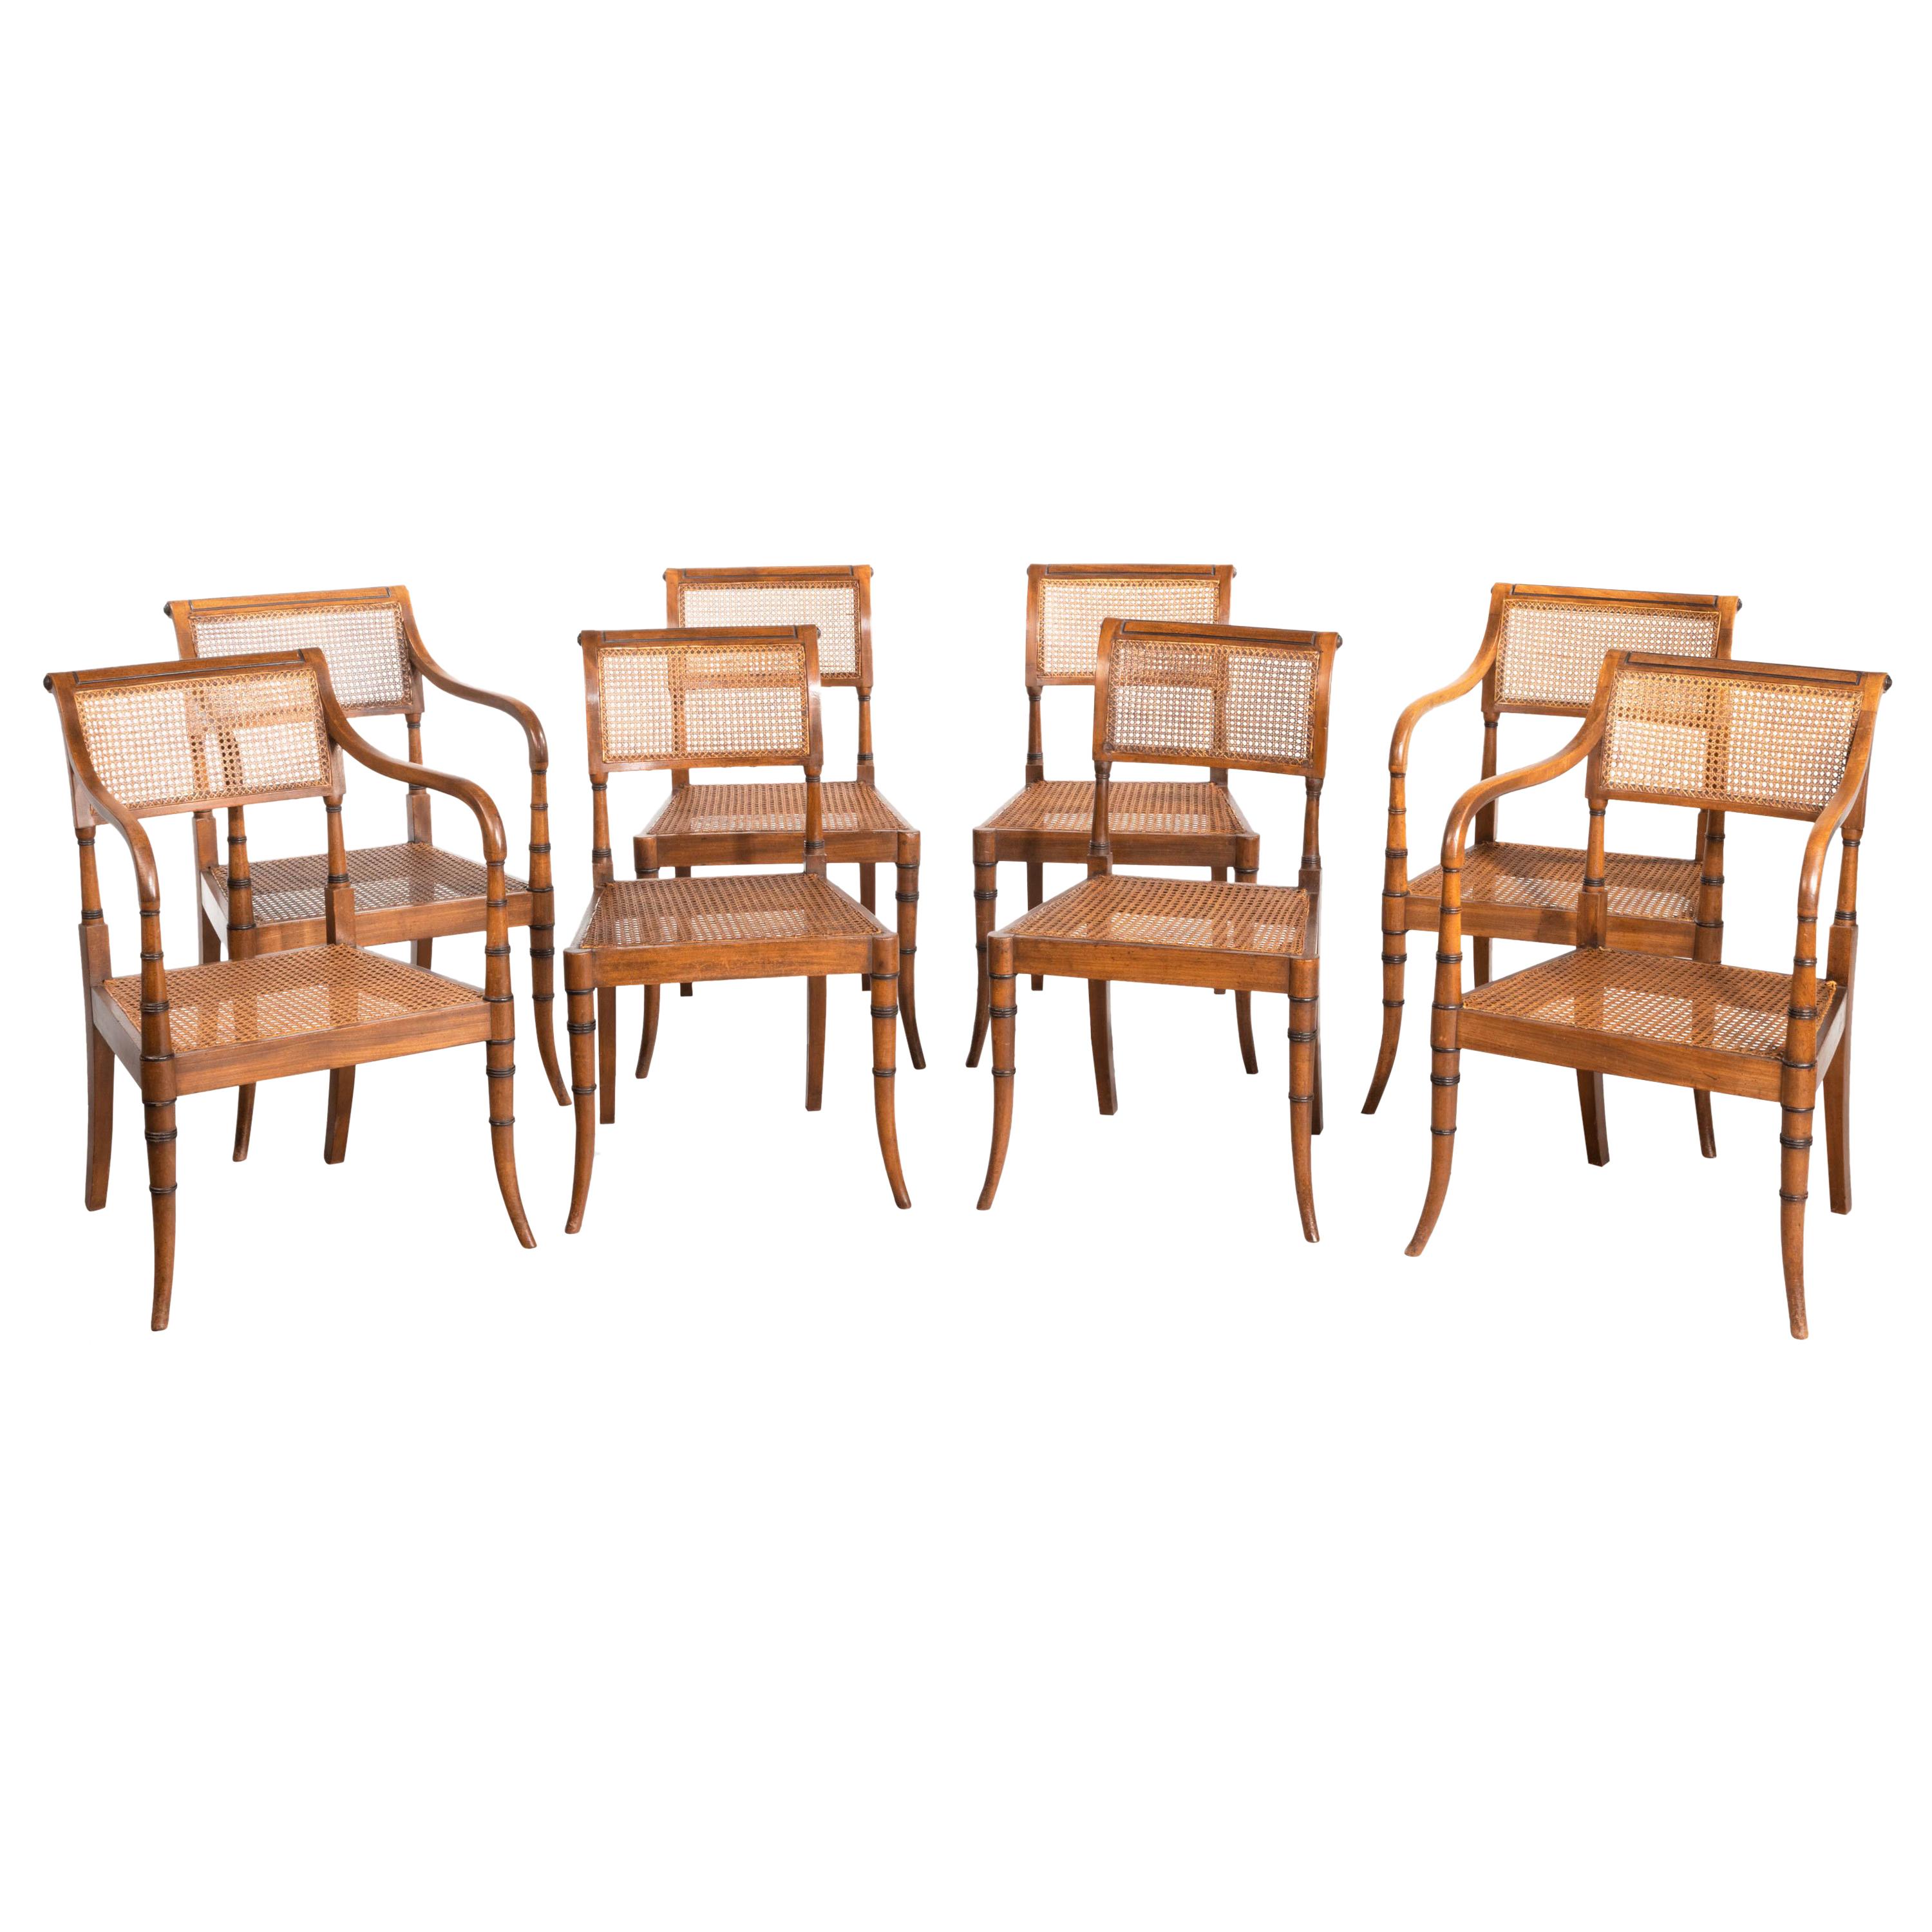 Suite of Eight Regency Period Mahogany Chairs